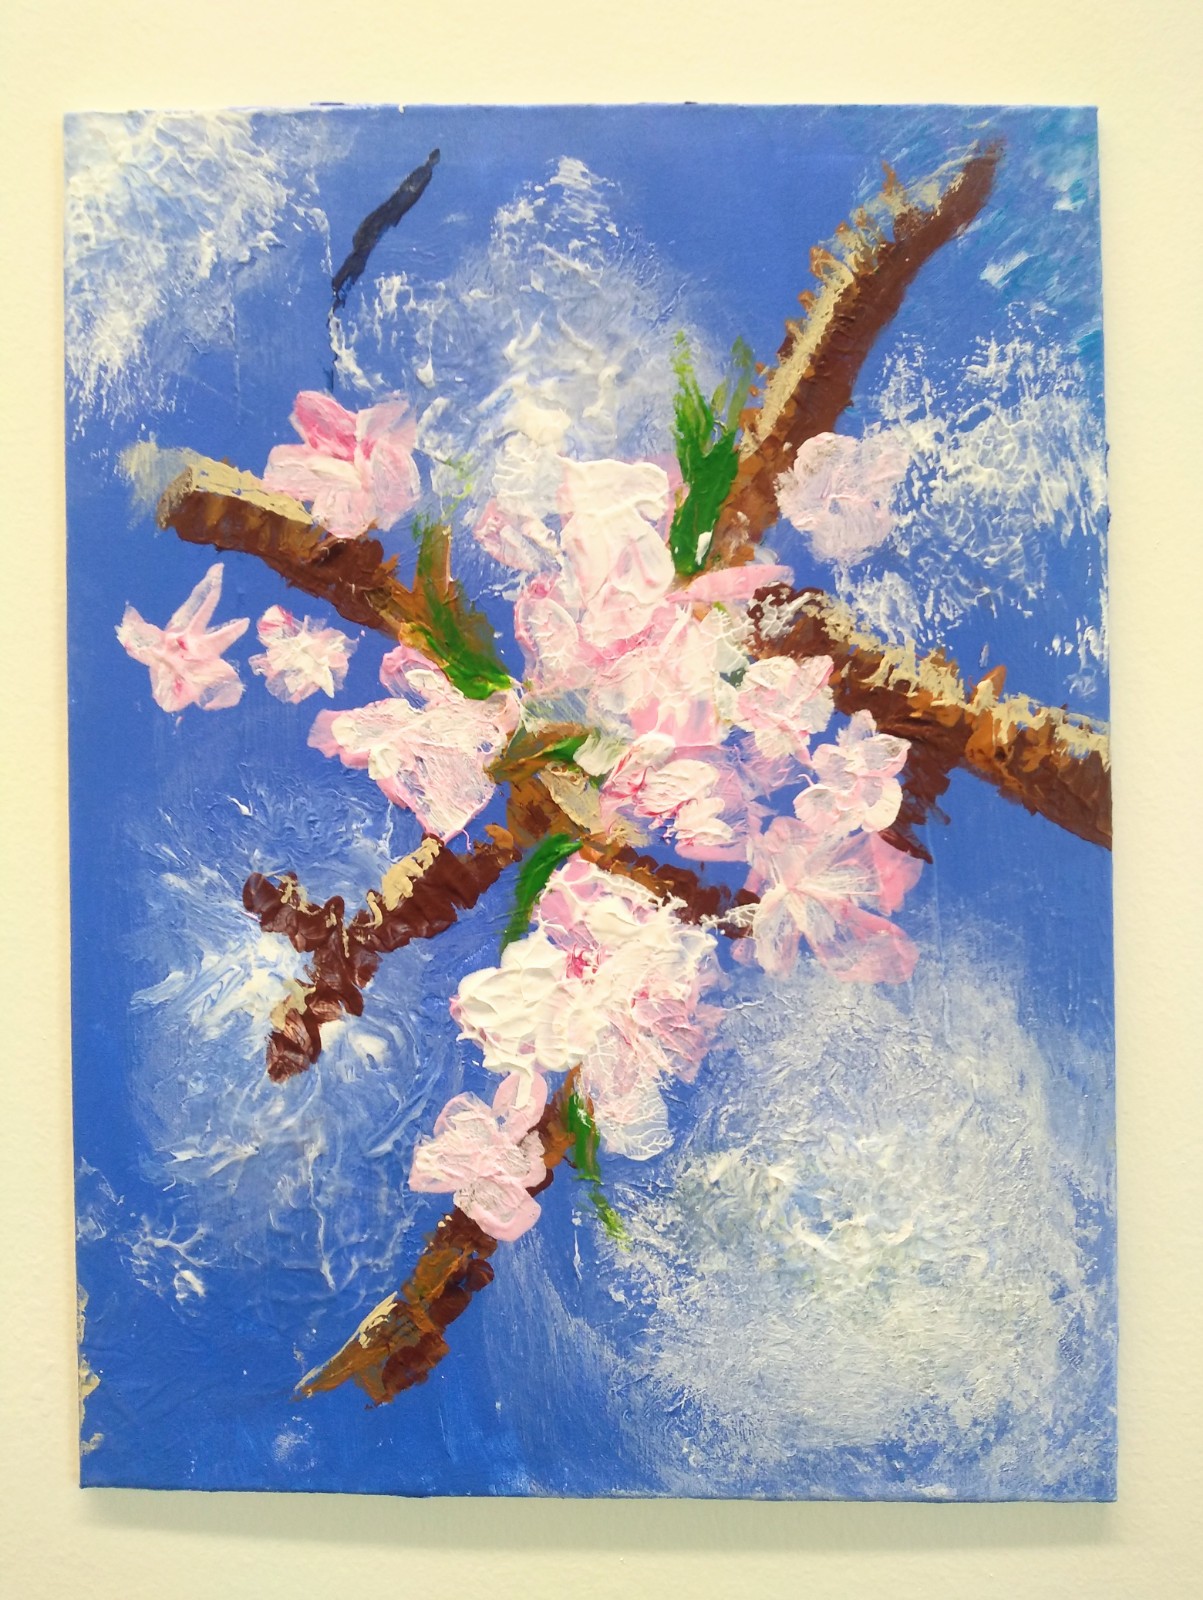 Textured cherry blossom on a branch with sky blue background.